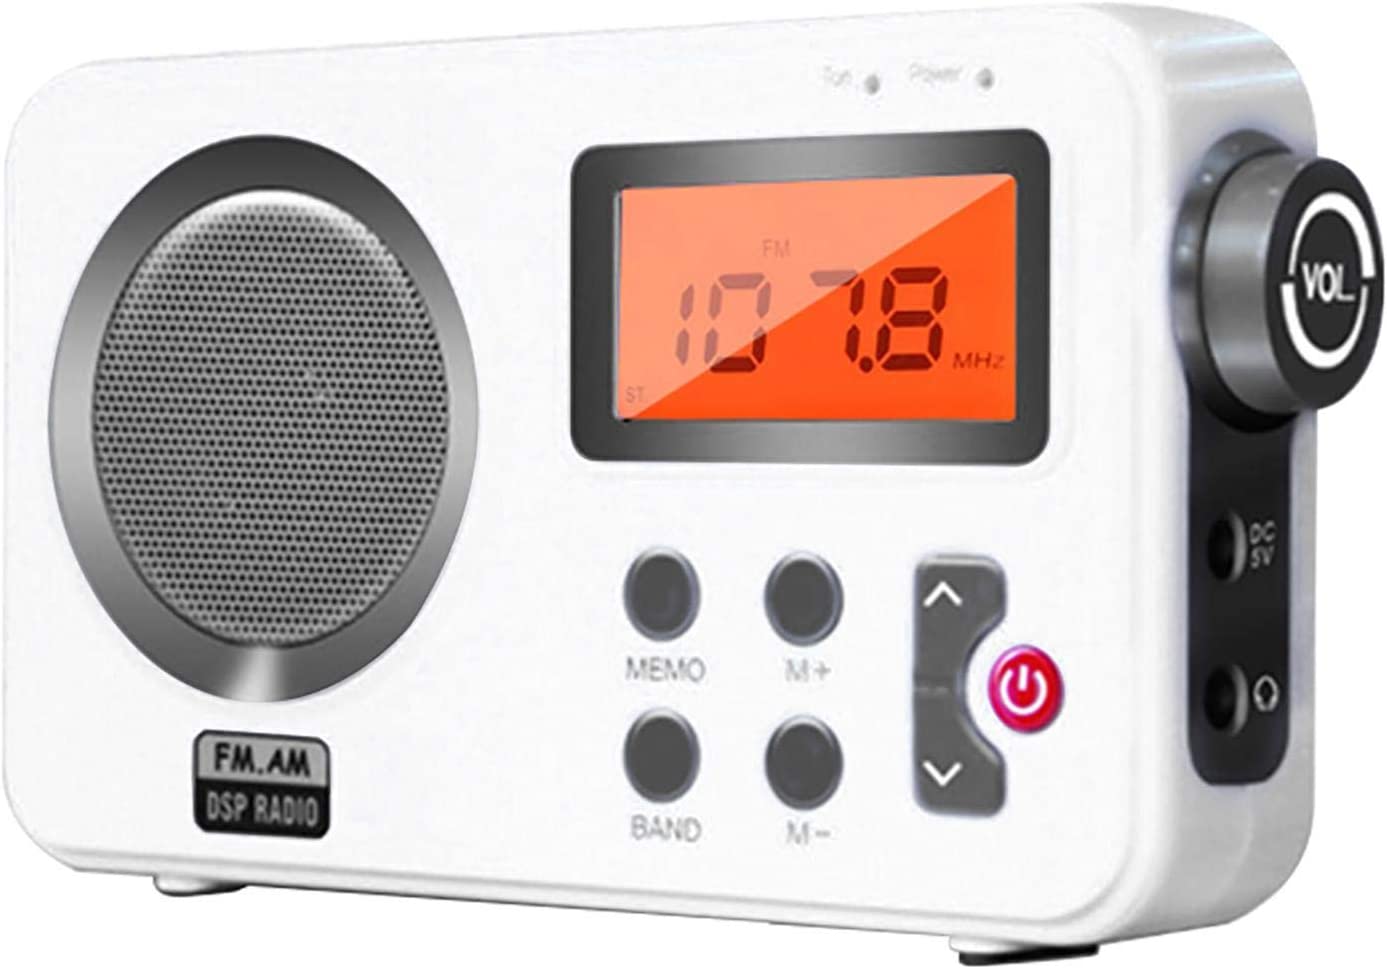 Shower Radio Speaker, Portable LCD Display Stereo Radio with AM/FM Radio/RDS System Long Playback Time Radio with Preset 20 Radio Stations for Bathroom, Hot Tub, Outdoor(White)